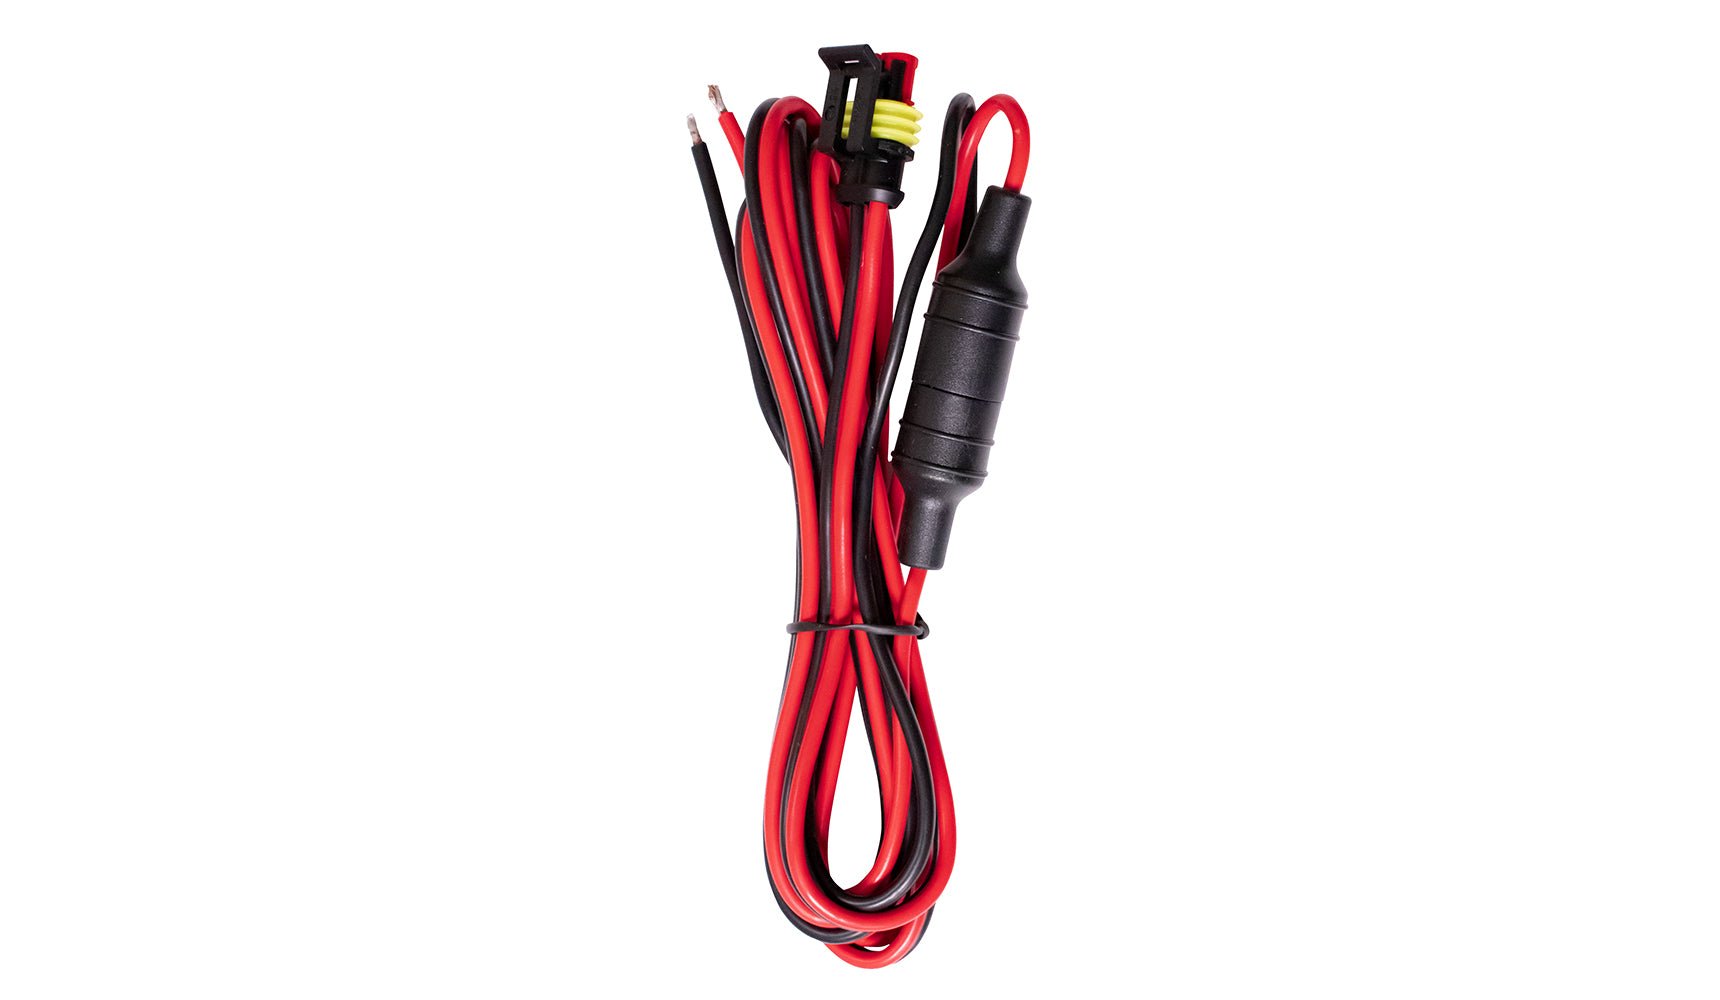 MXTA52 12V Power Cord or Connector